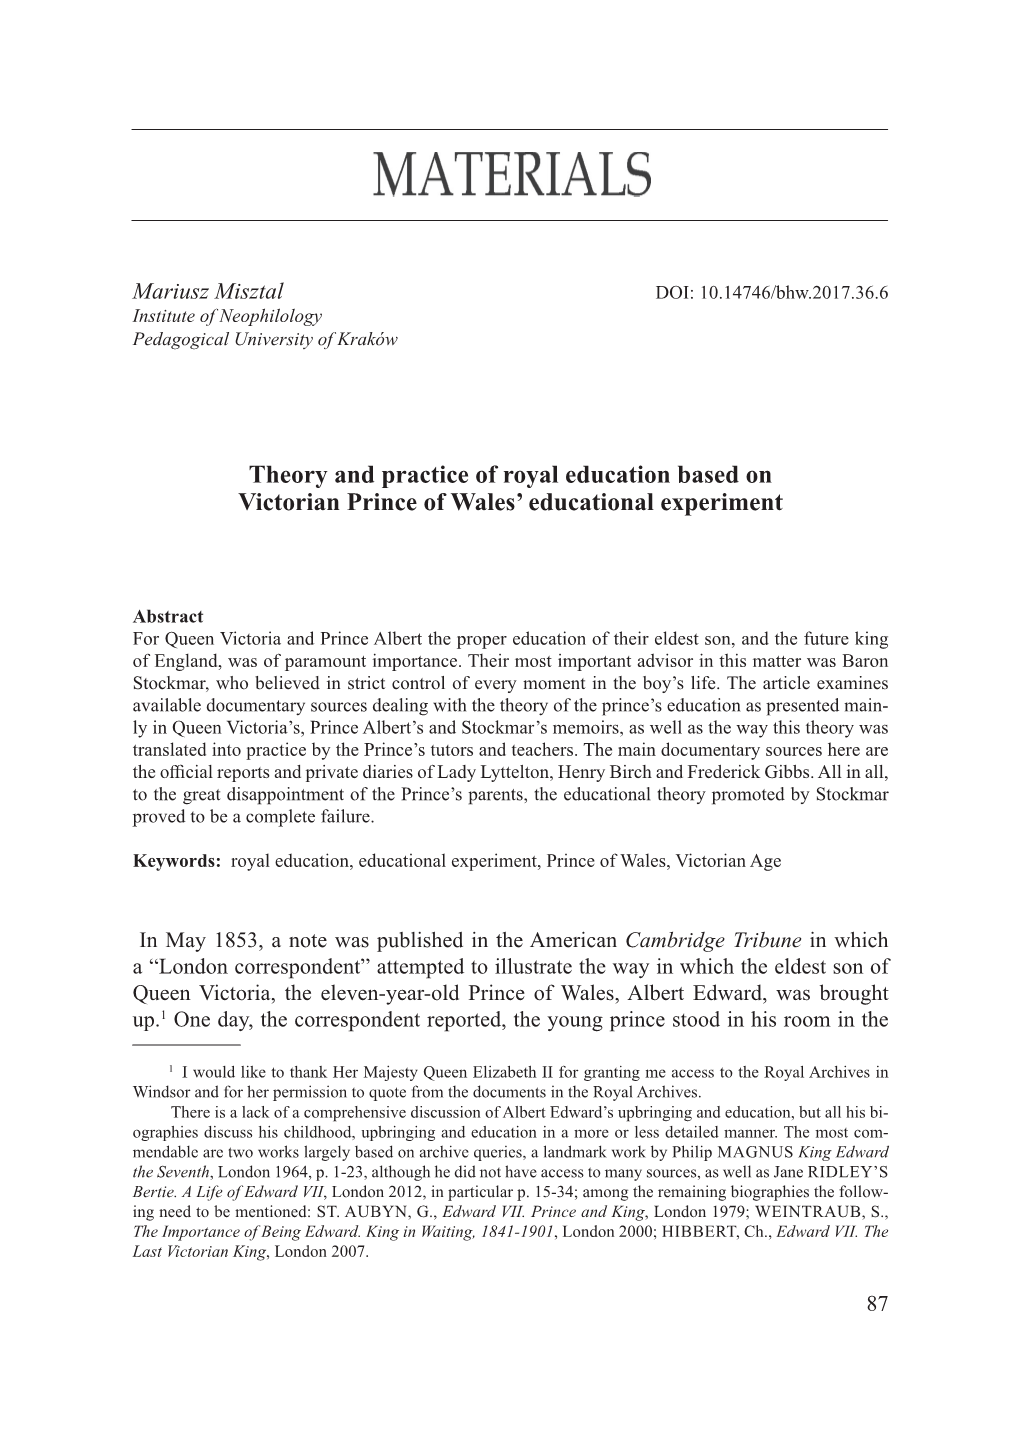 Theory and Practice of Royal Education Based on Victorian Prince of Wales’ Educational Experiment